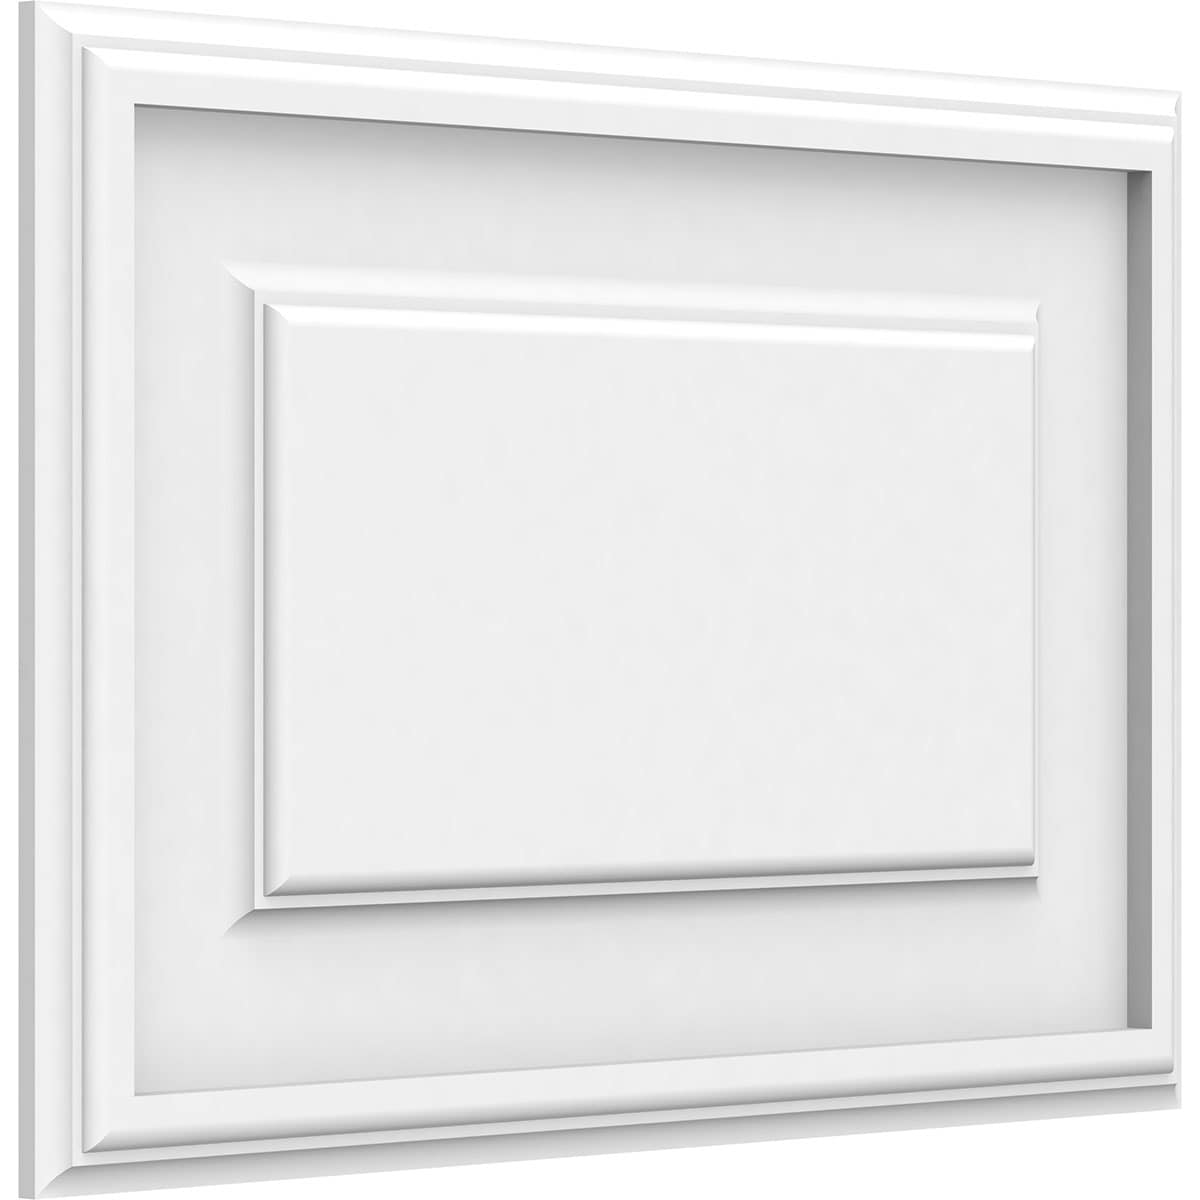 Ekena Millwork 18-in x 12-in Smooth White PVC Wainscot Wall Panel in ...